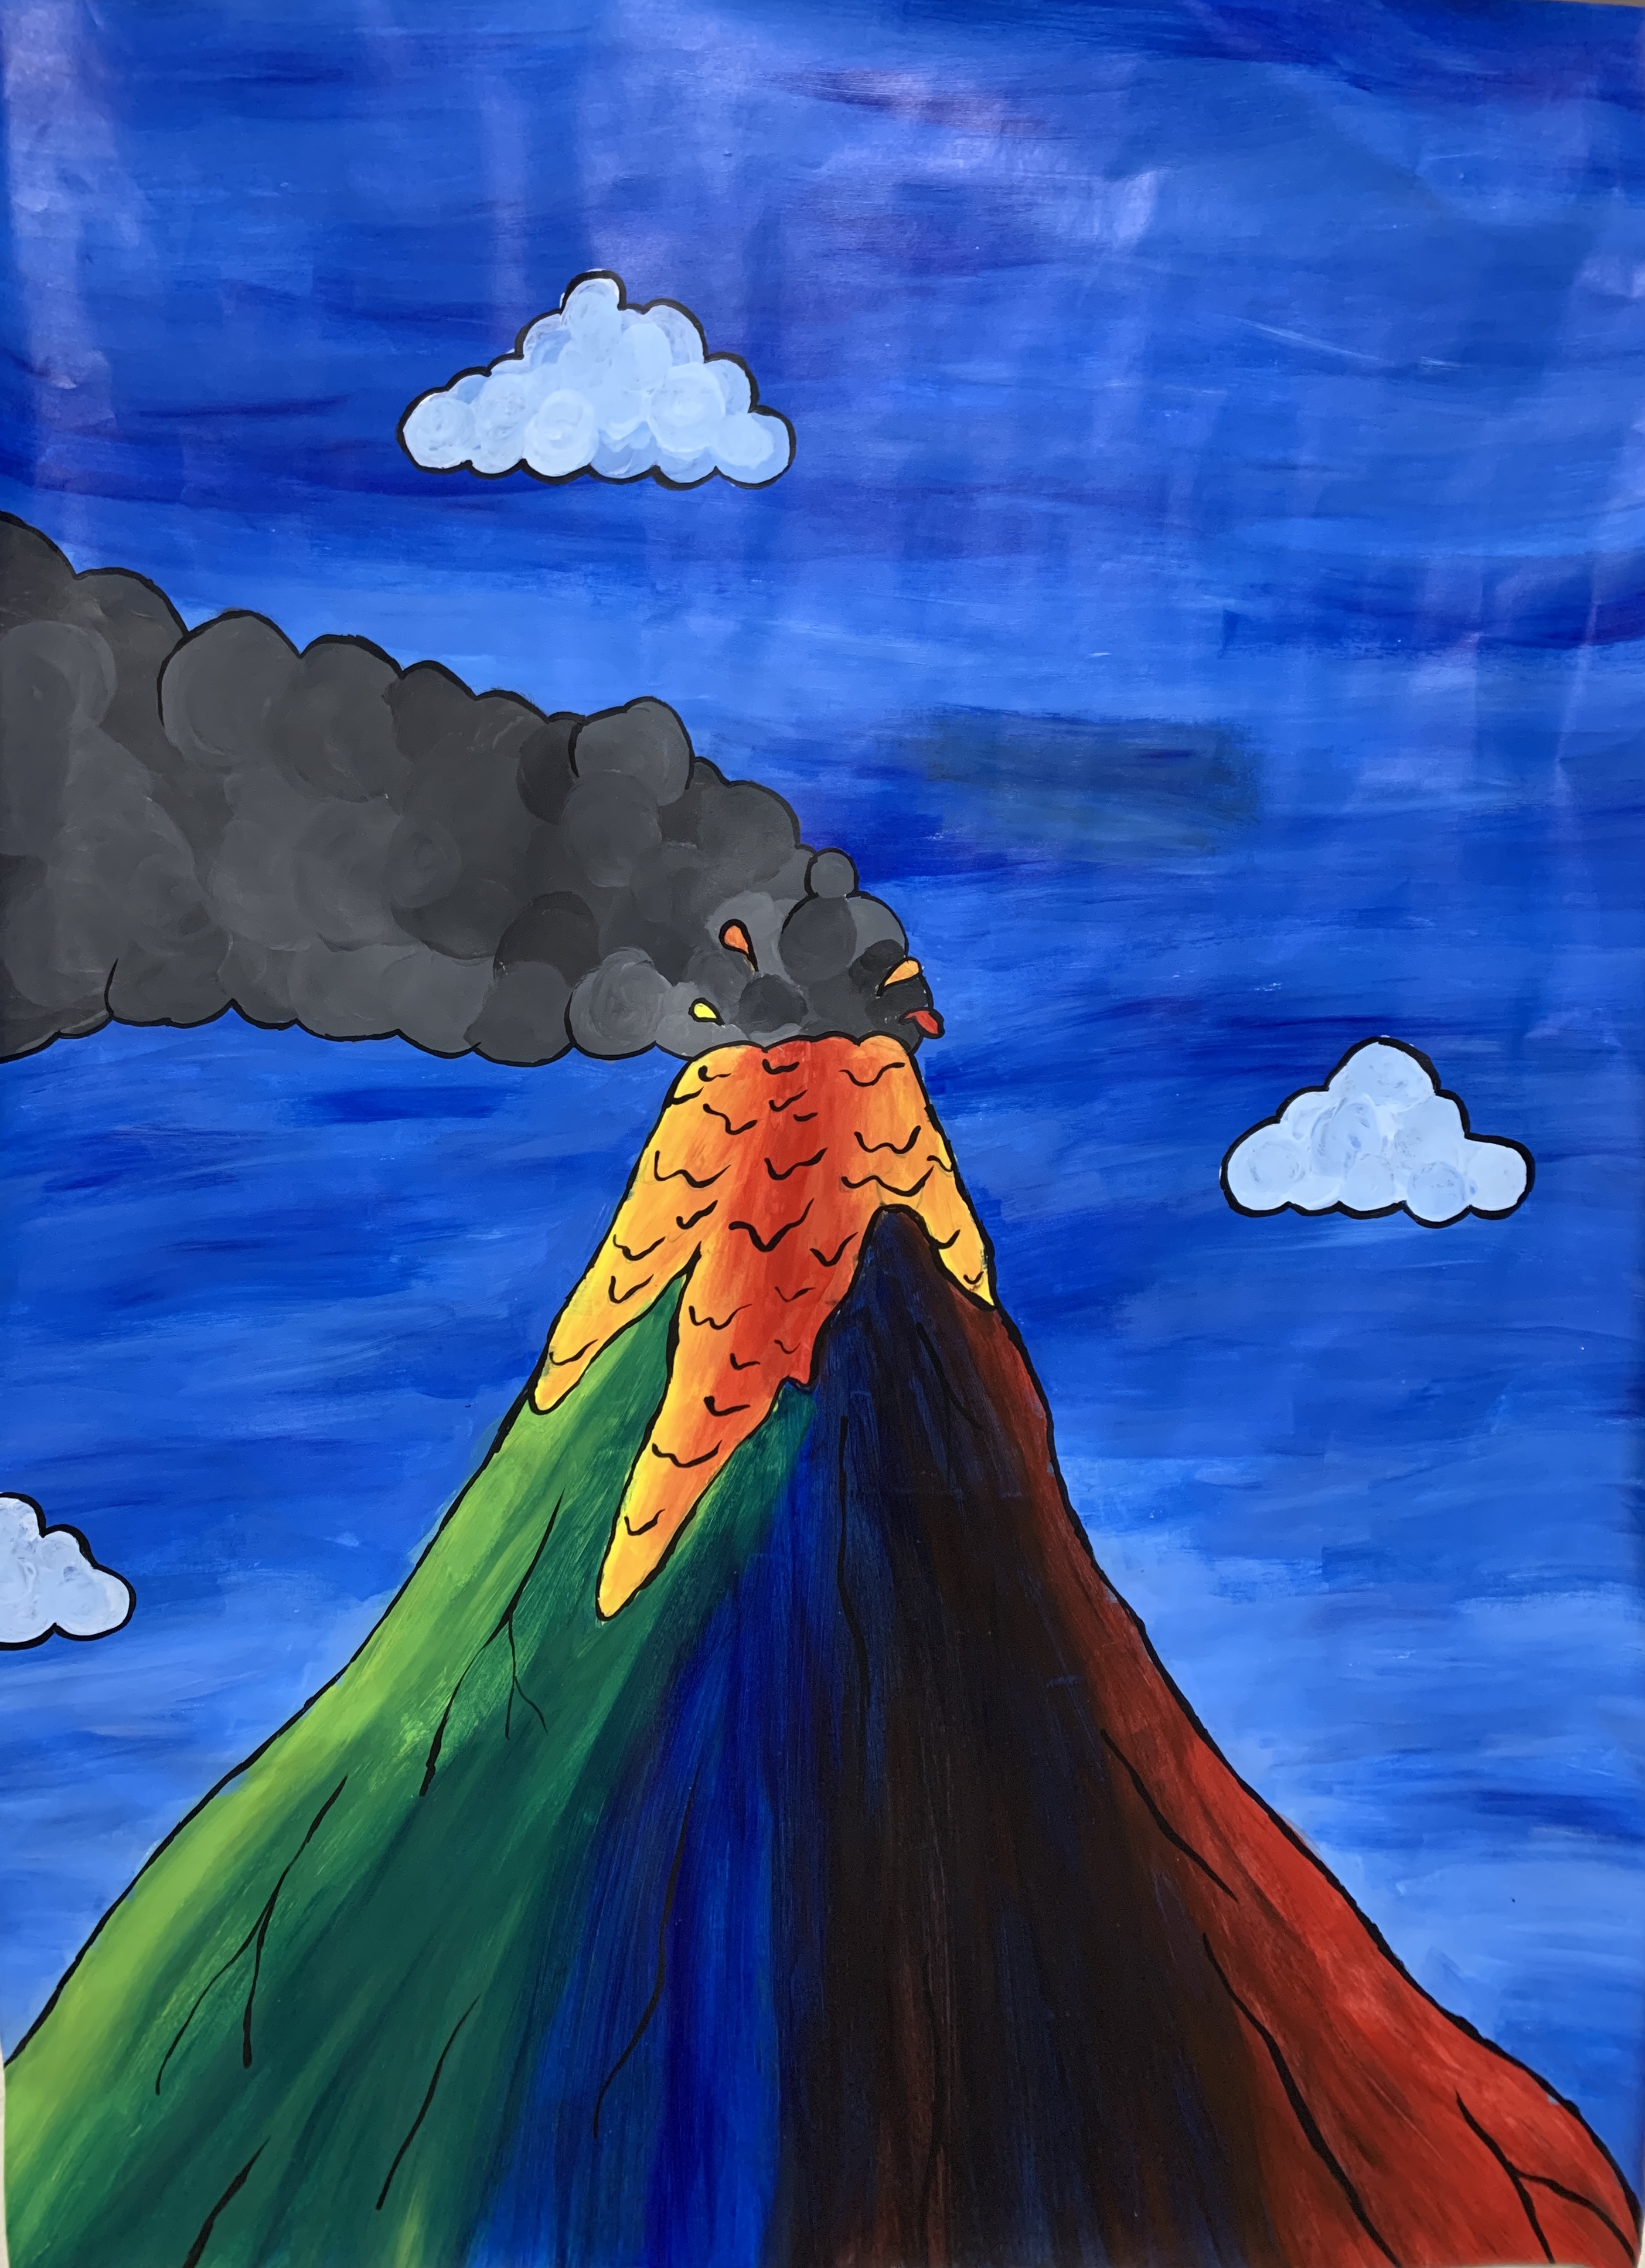 Students color wheel project - volcano